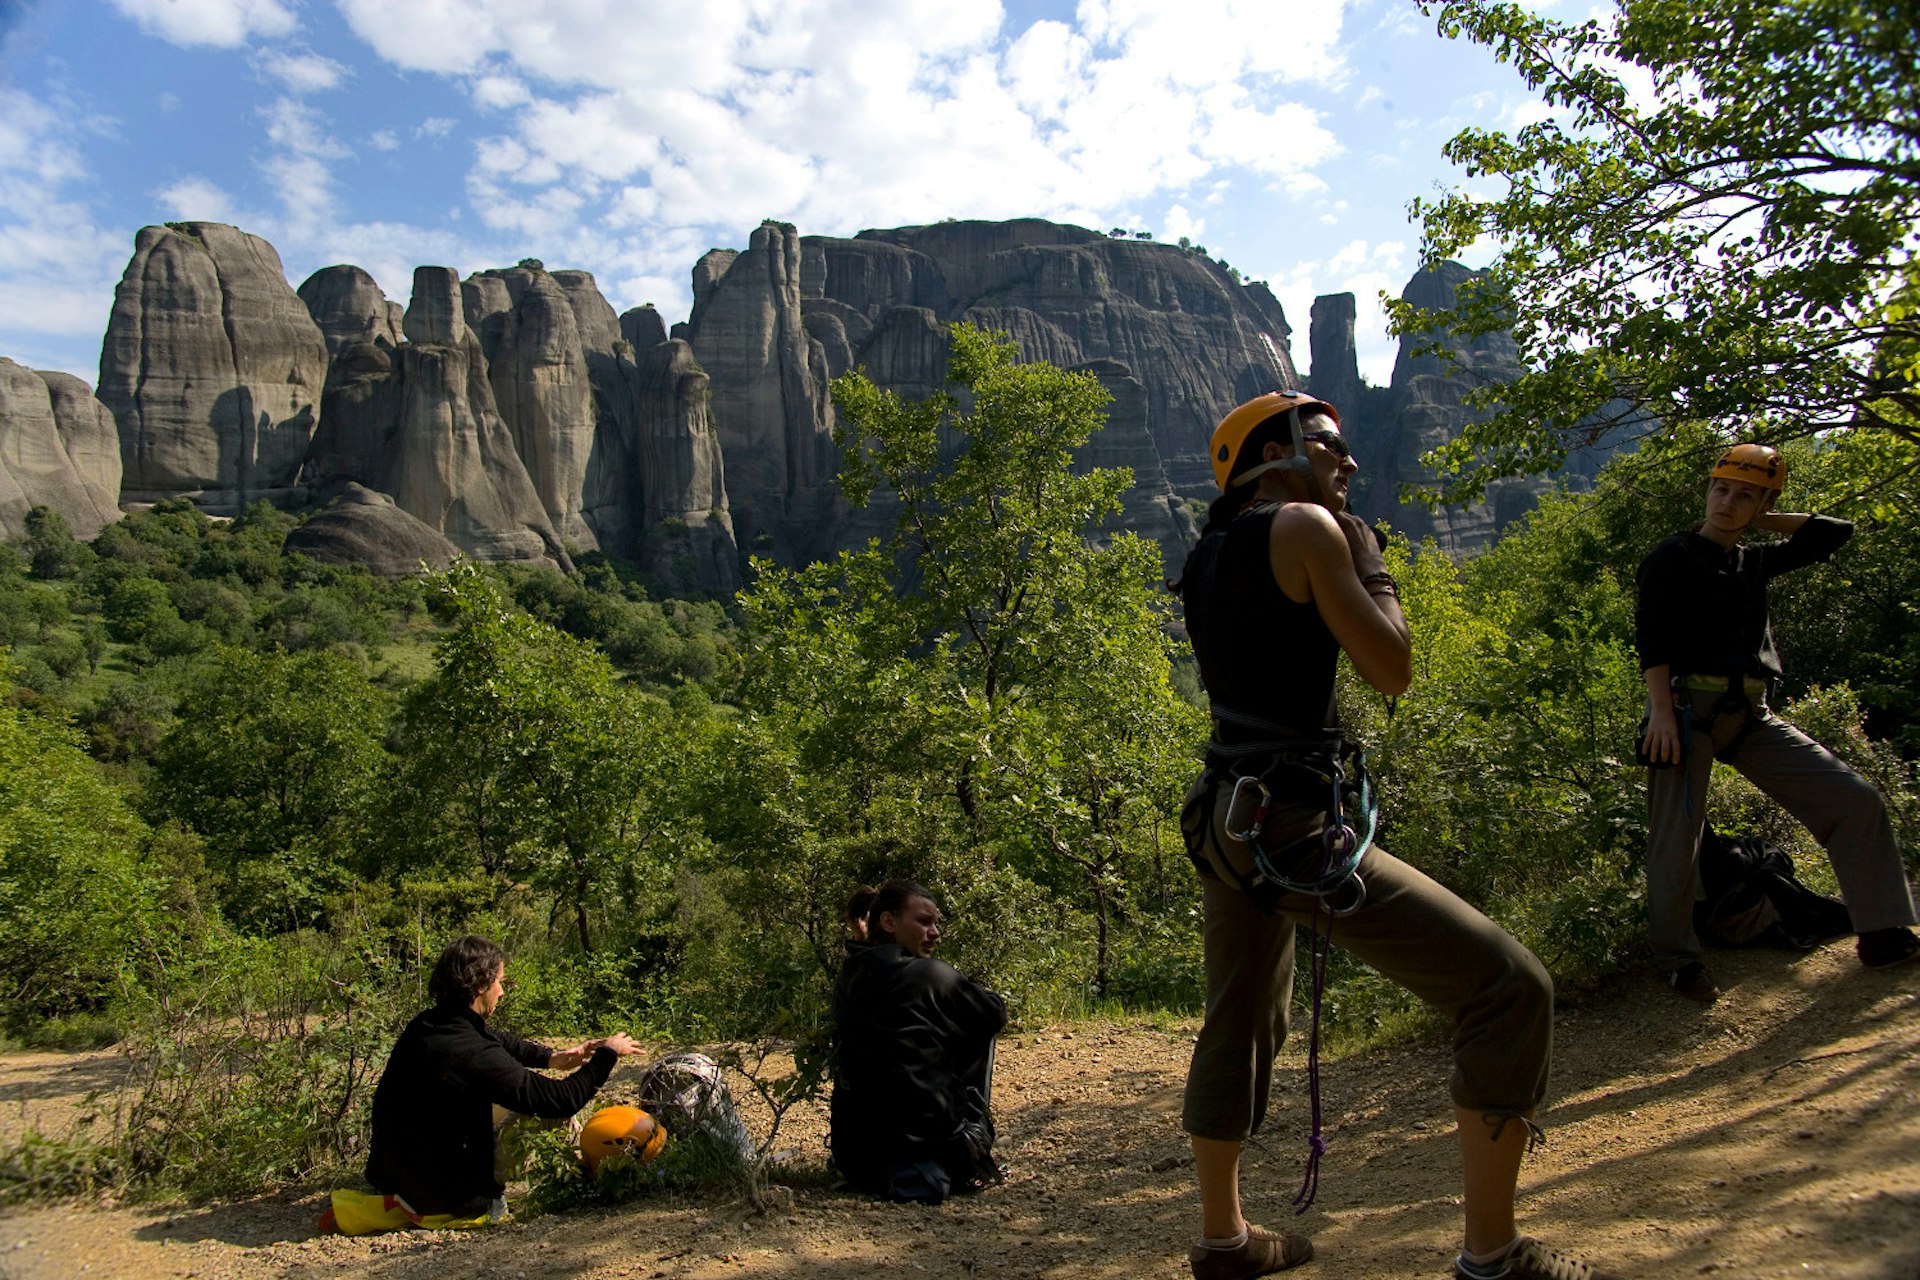 Rock climbers facing the challenge of Meteora © Milos Bicanski / Getty Images